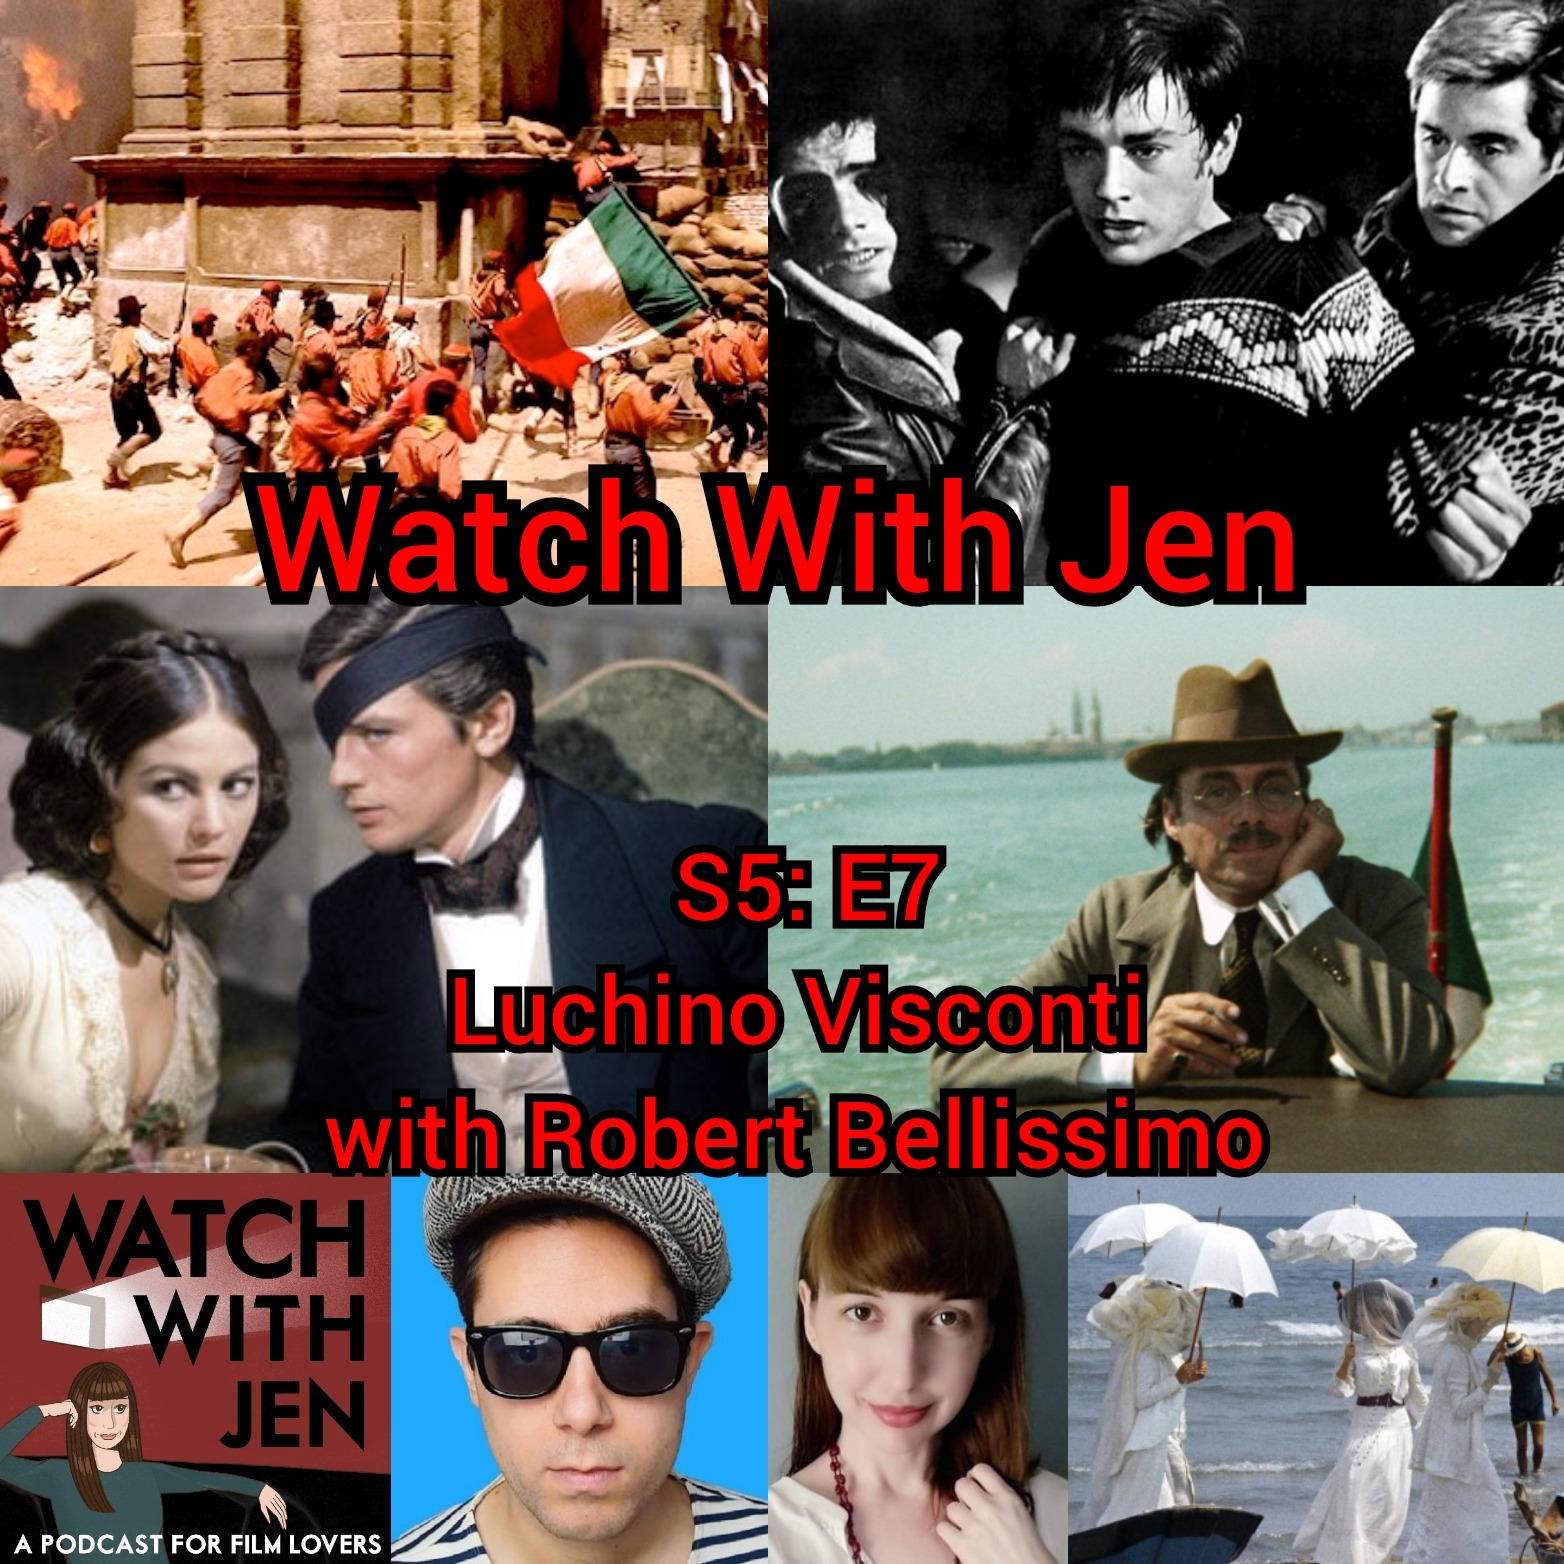 Watch With Jen - S5: E7 - Luchino Visconti with Robert Bellissimo